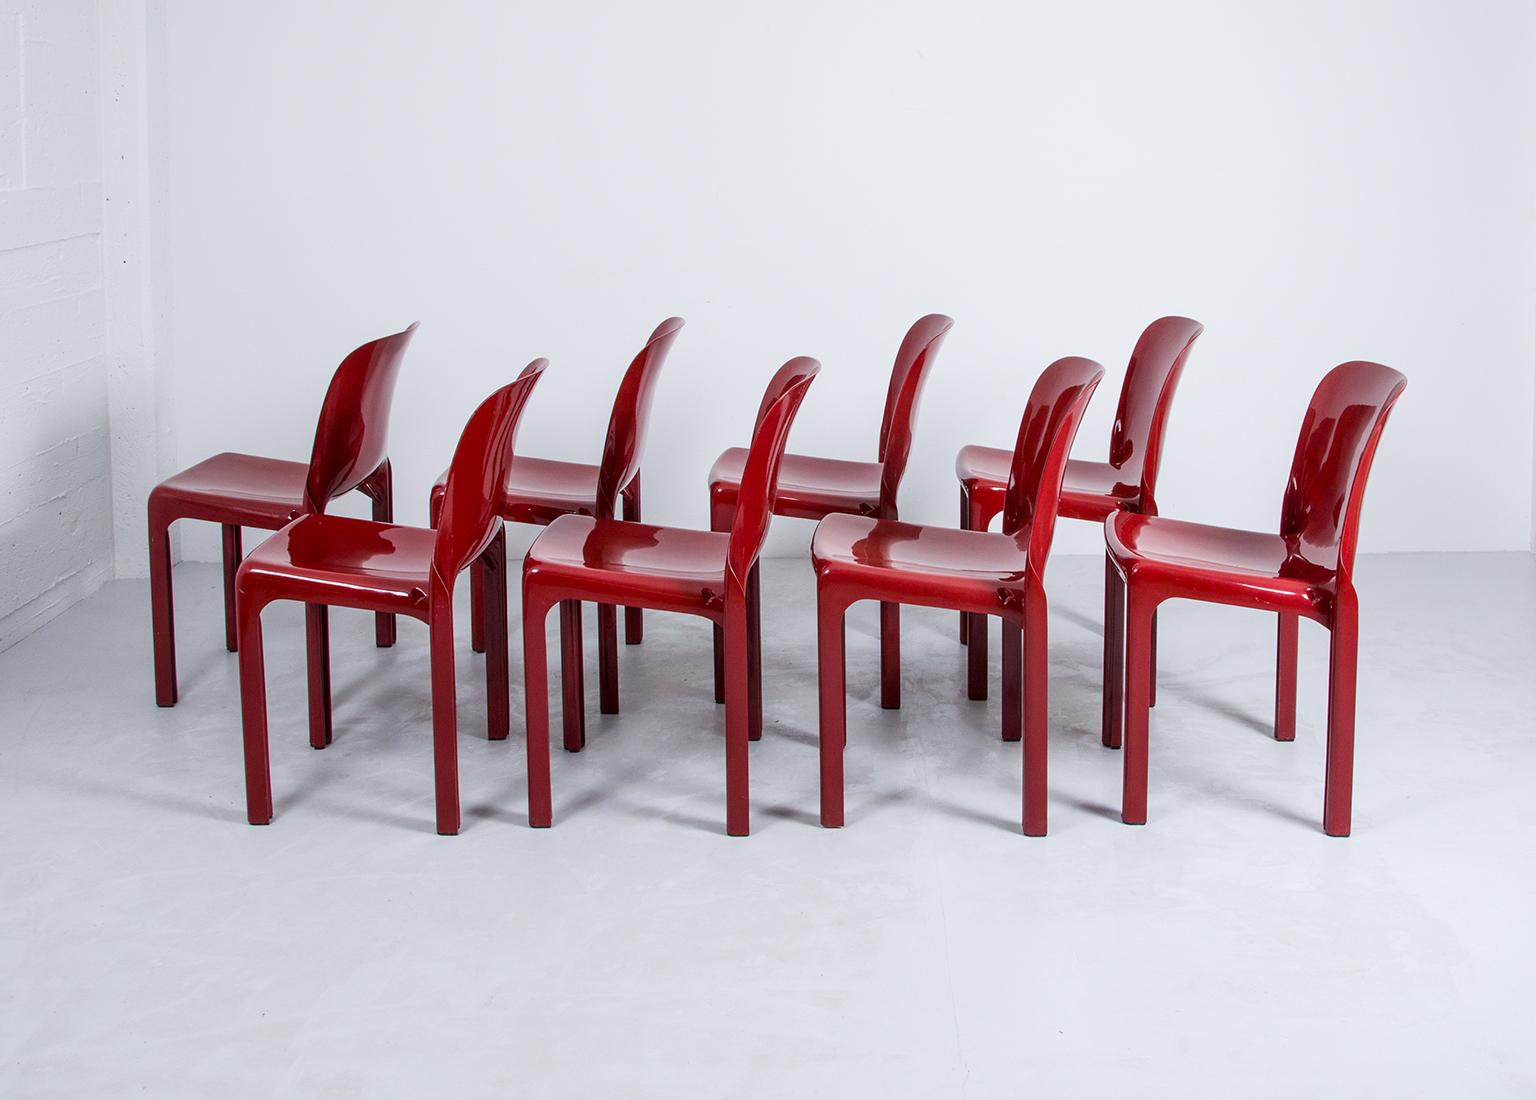 3 Selene Stacking Chairs by Vico Magistretti for Artemide in Dark Red In Good Condition For Sale In Zurich, CH